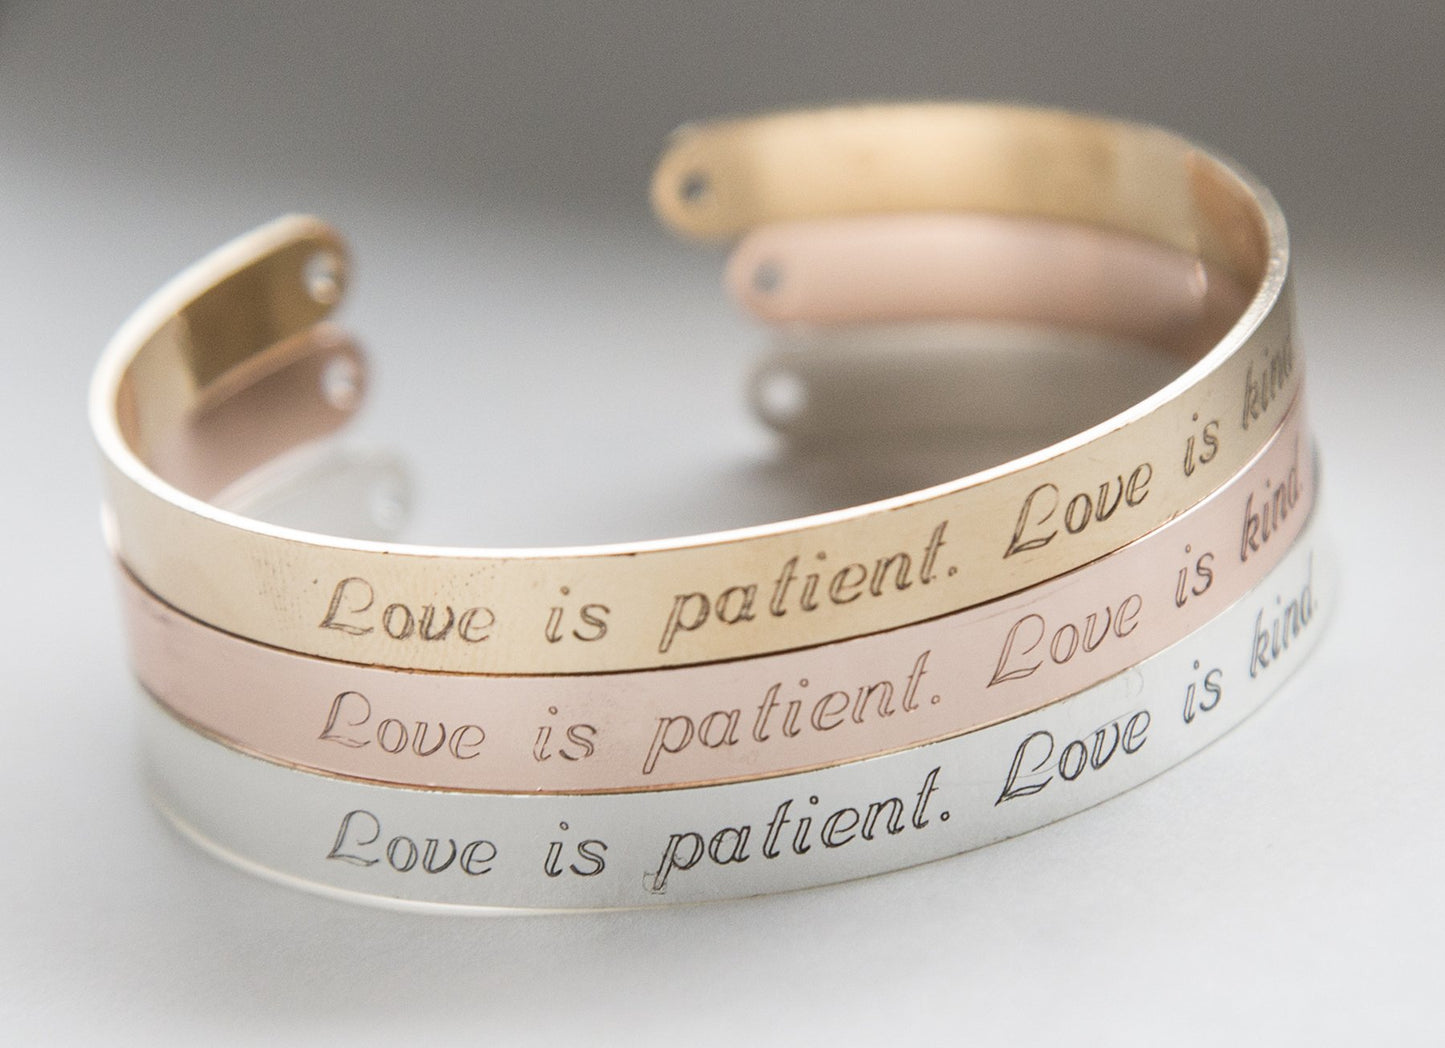 Love is Patient, Love is Kind - armband